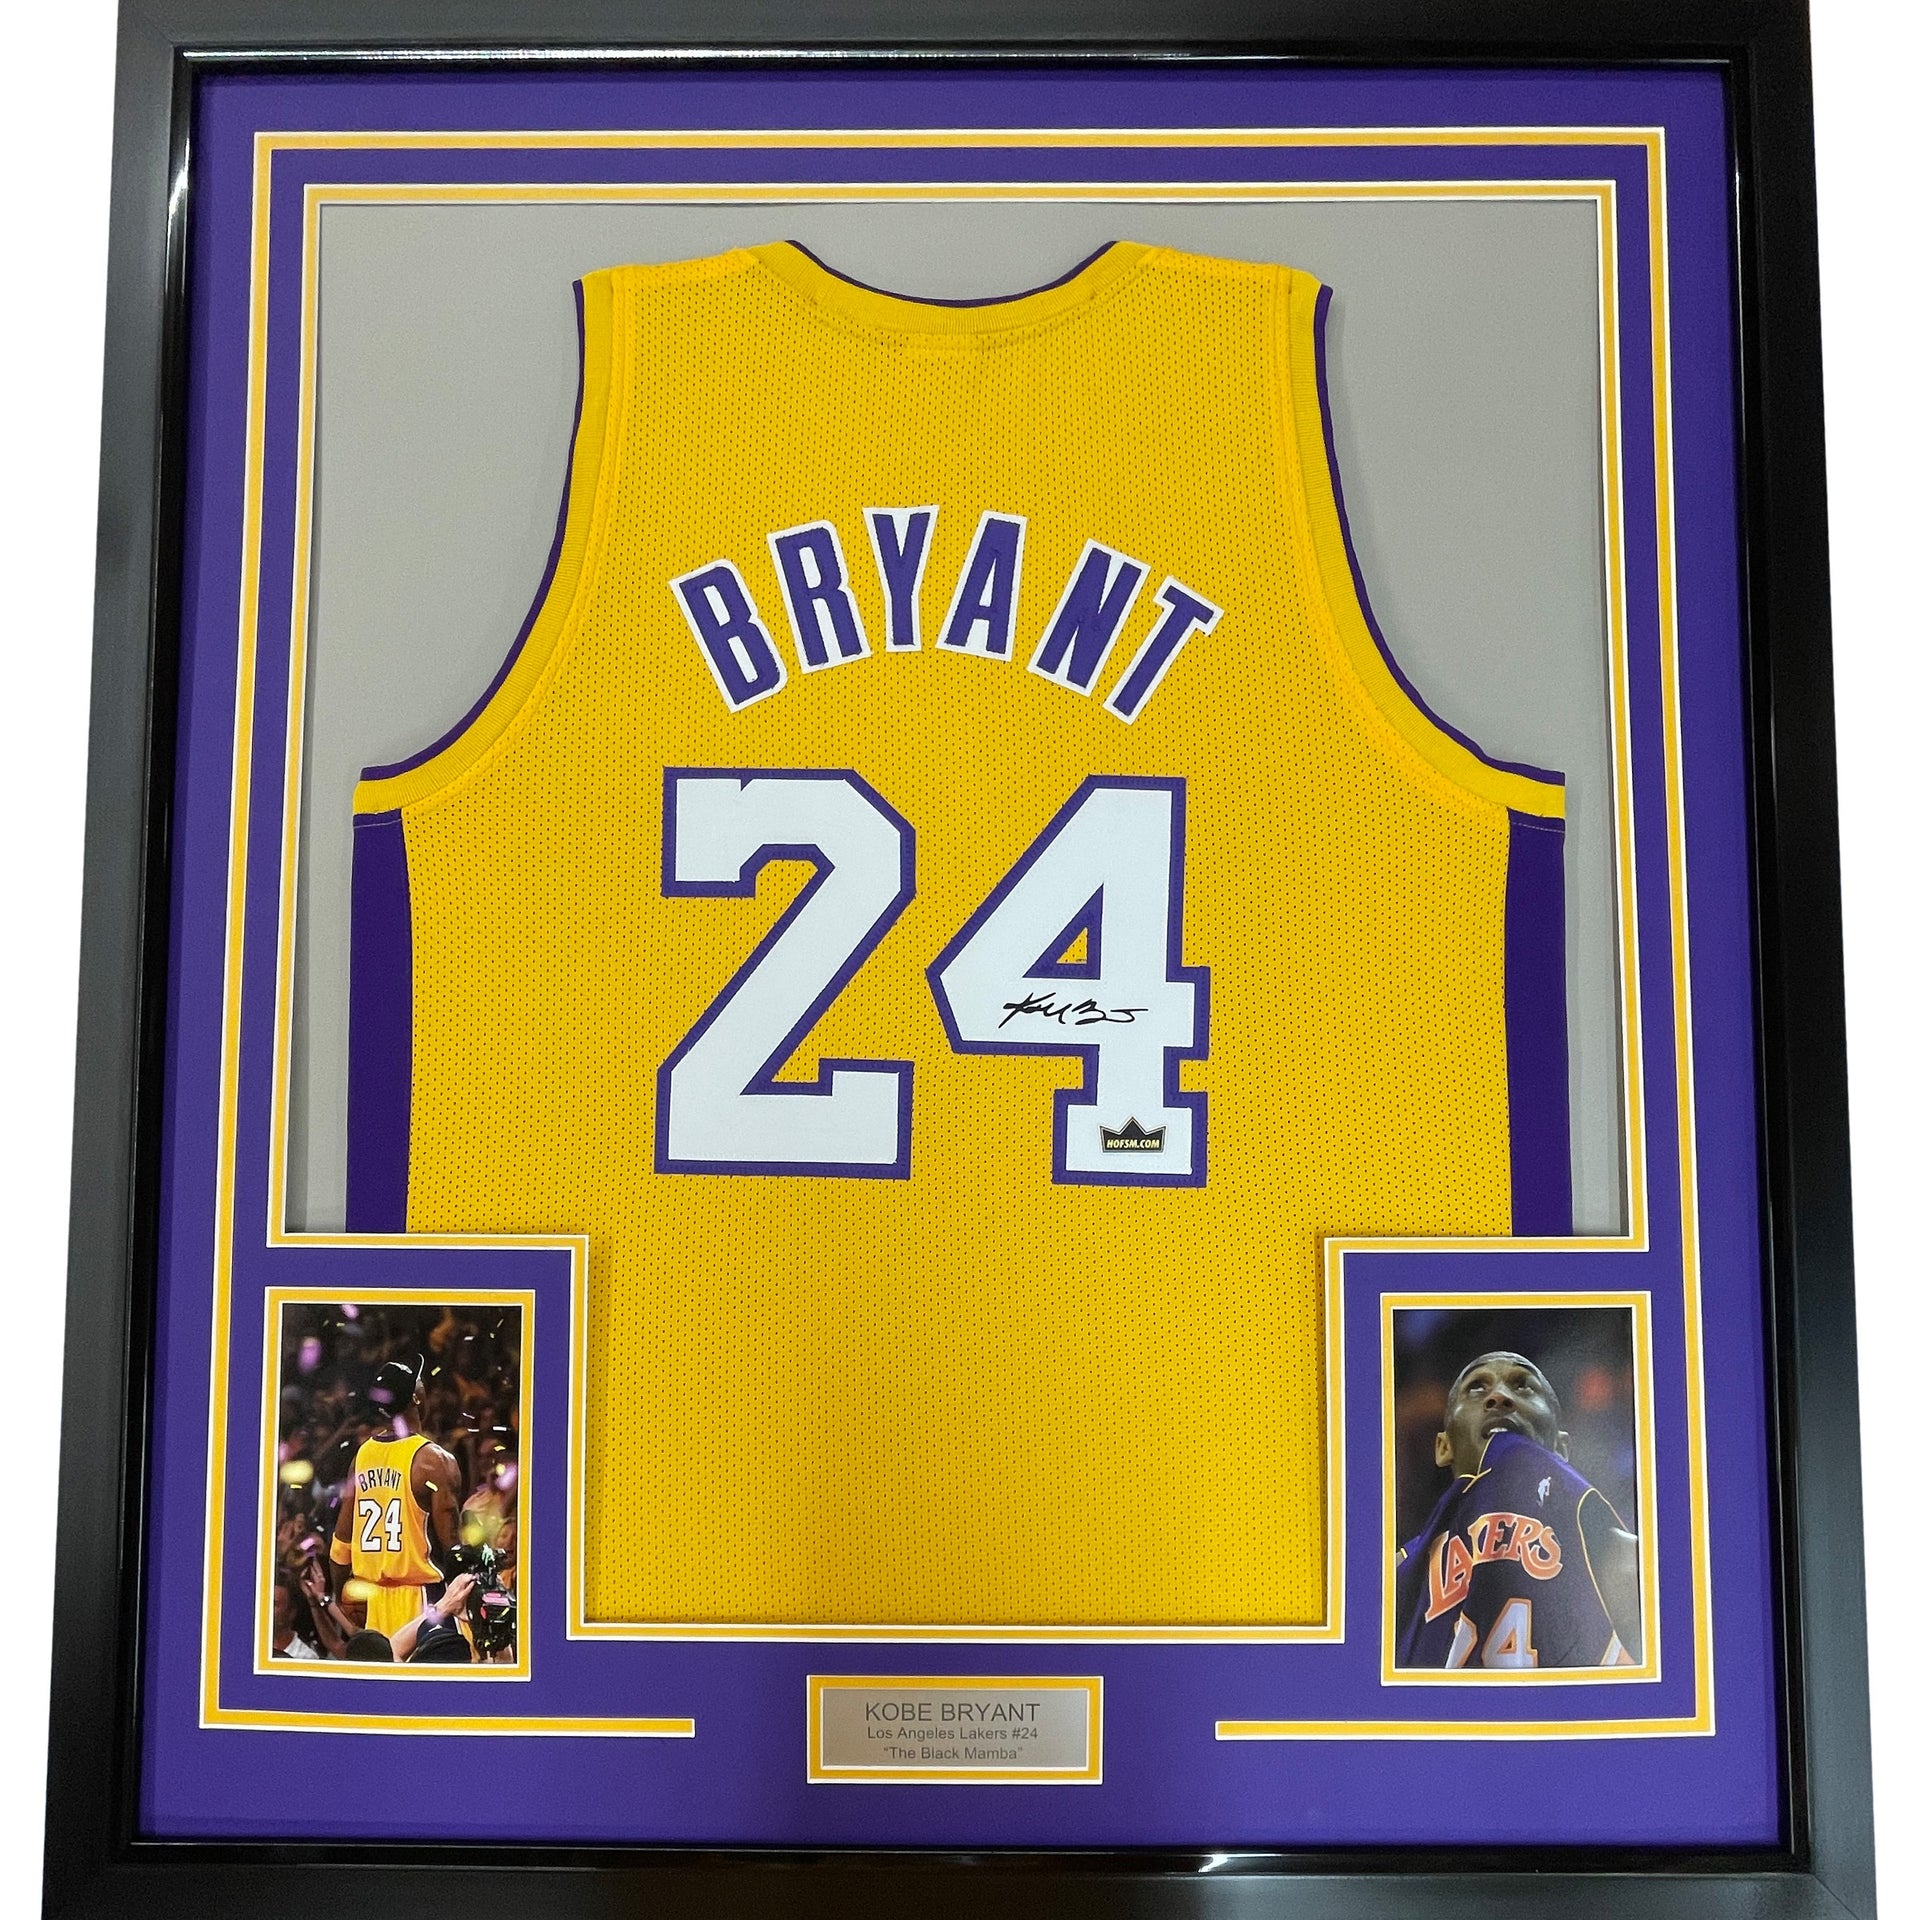 Kobe Bryant Framed #24 Jersey with Autographed Card